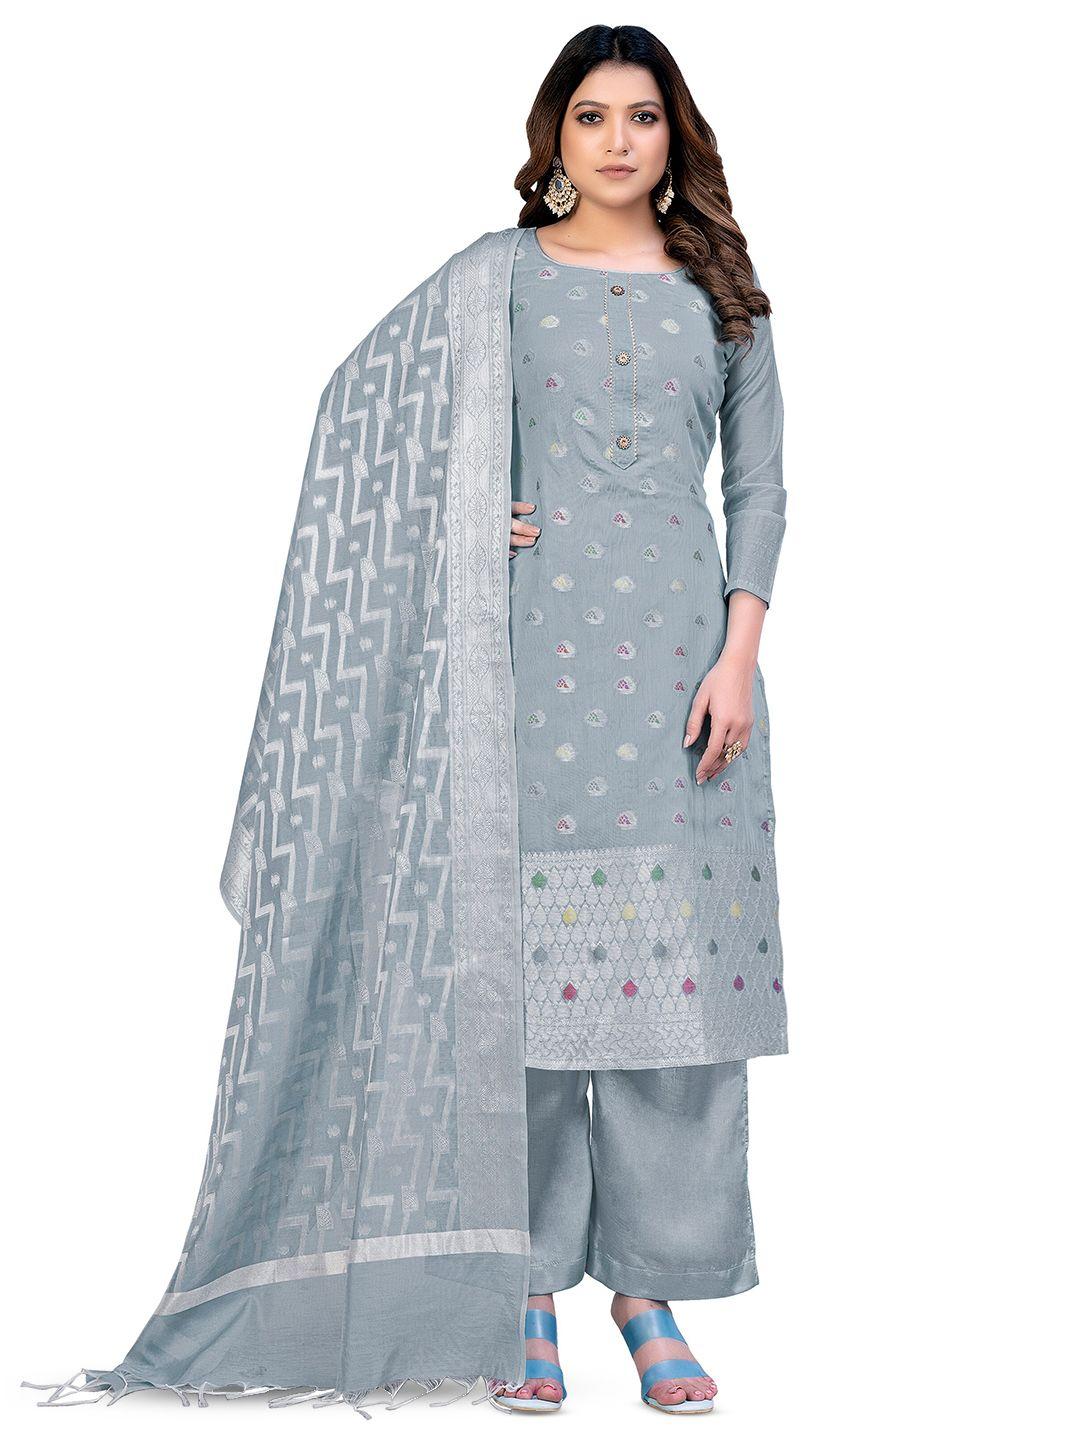 MANVAA Grey Unstitched Dress Material